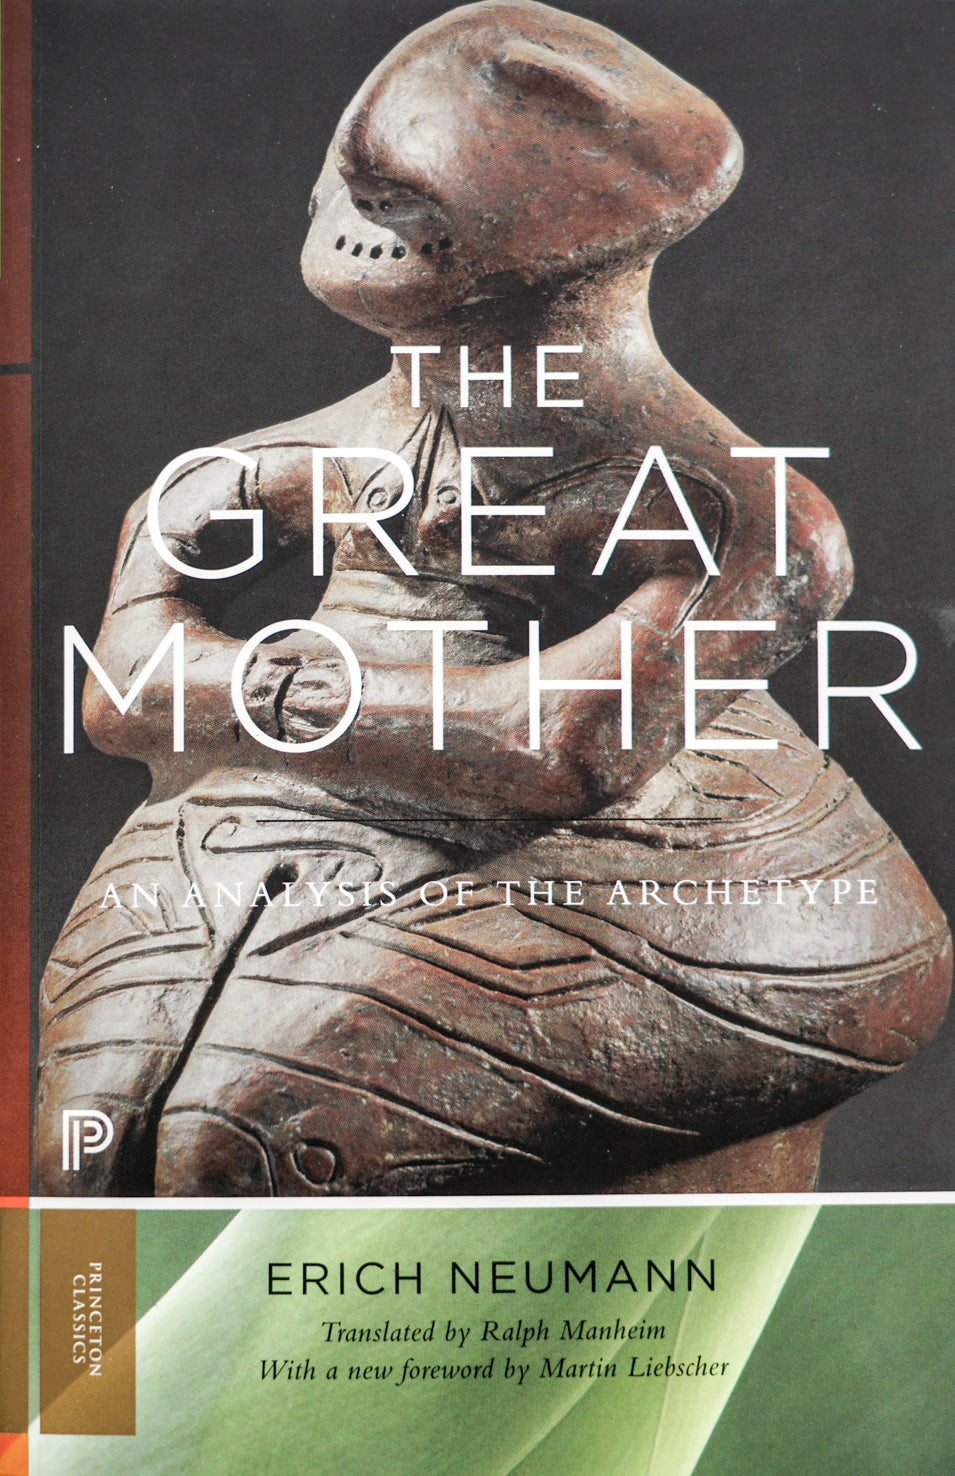 The cover of this softback book shows the title in white sans serif overlaid on top of a photograph of a brown sculpture of a woman.